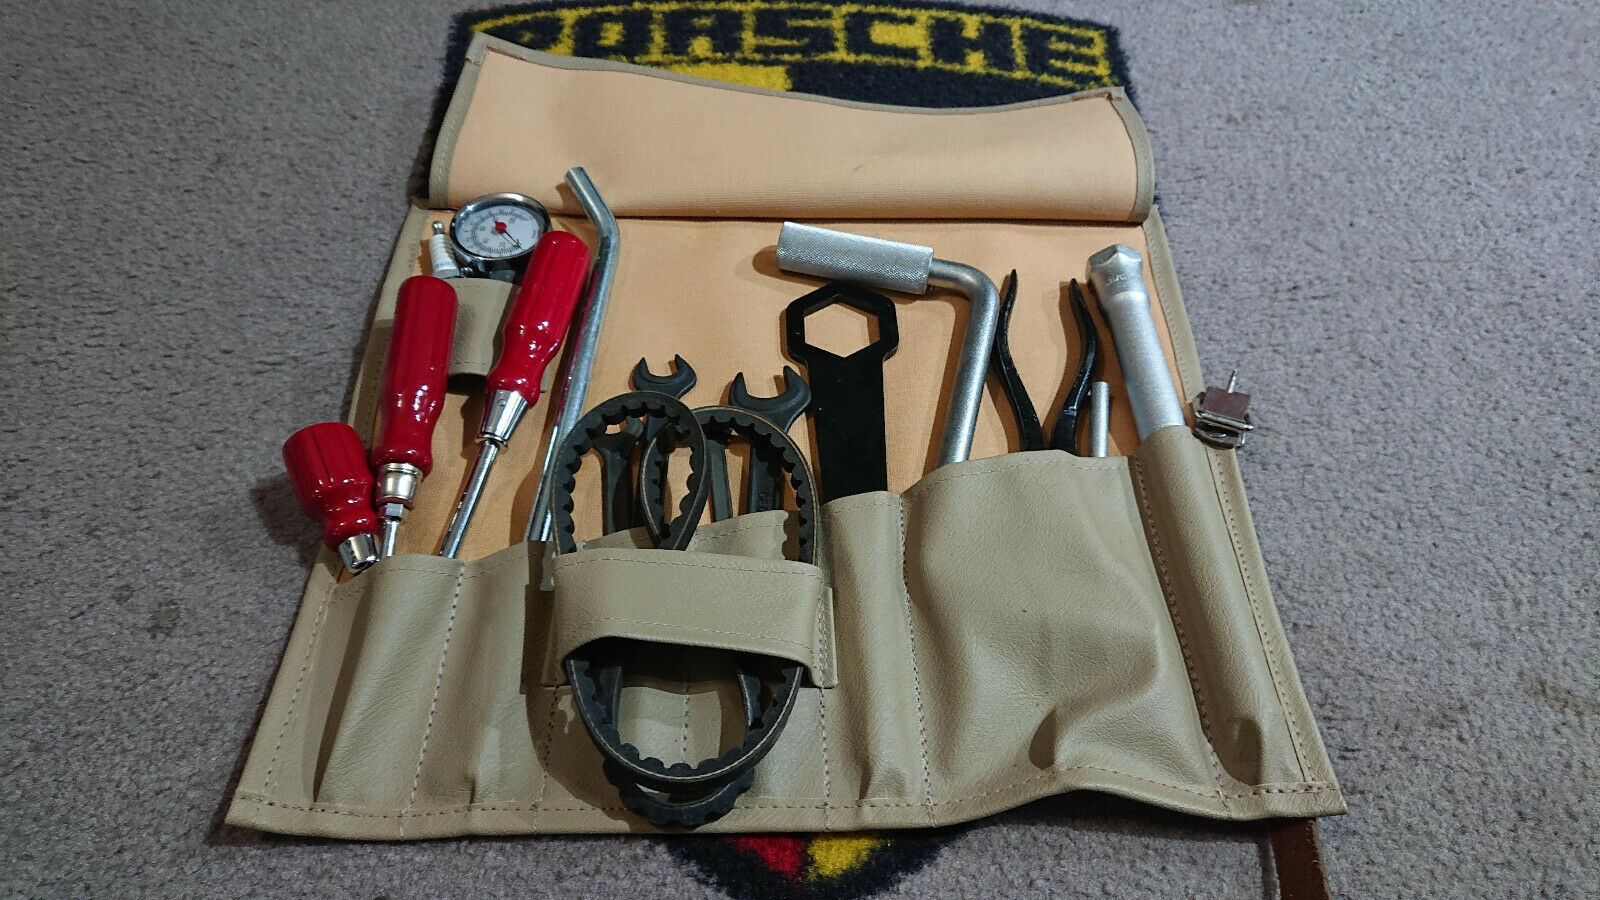 We are offering this nice reproduction tool kit for the Porsche 356A. The tool kit is complete and uses a kk tool bag and very good quality reproduction tools, Spanners and a KK exclusive plug wrench, a KK Hazet 772 wheel wrench. superb reproduction screw drivers , a KK generator wrench, restored pliers, nice original messko and a spark plug. .Includes a conti belt, tyre pressure gauge and . A great affordable tool kit that is ready to use